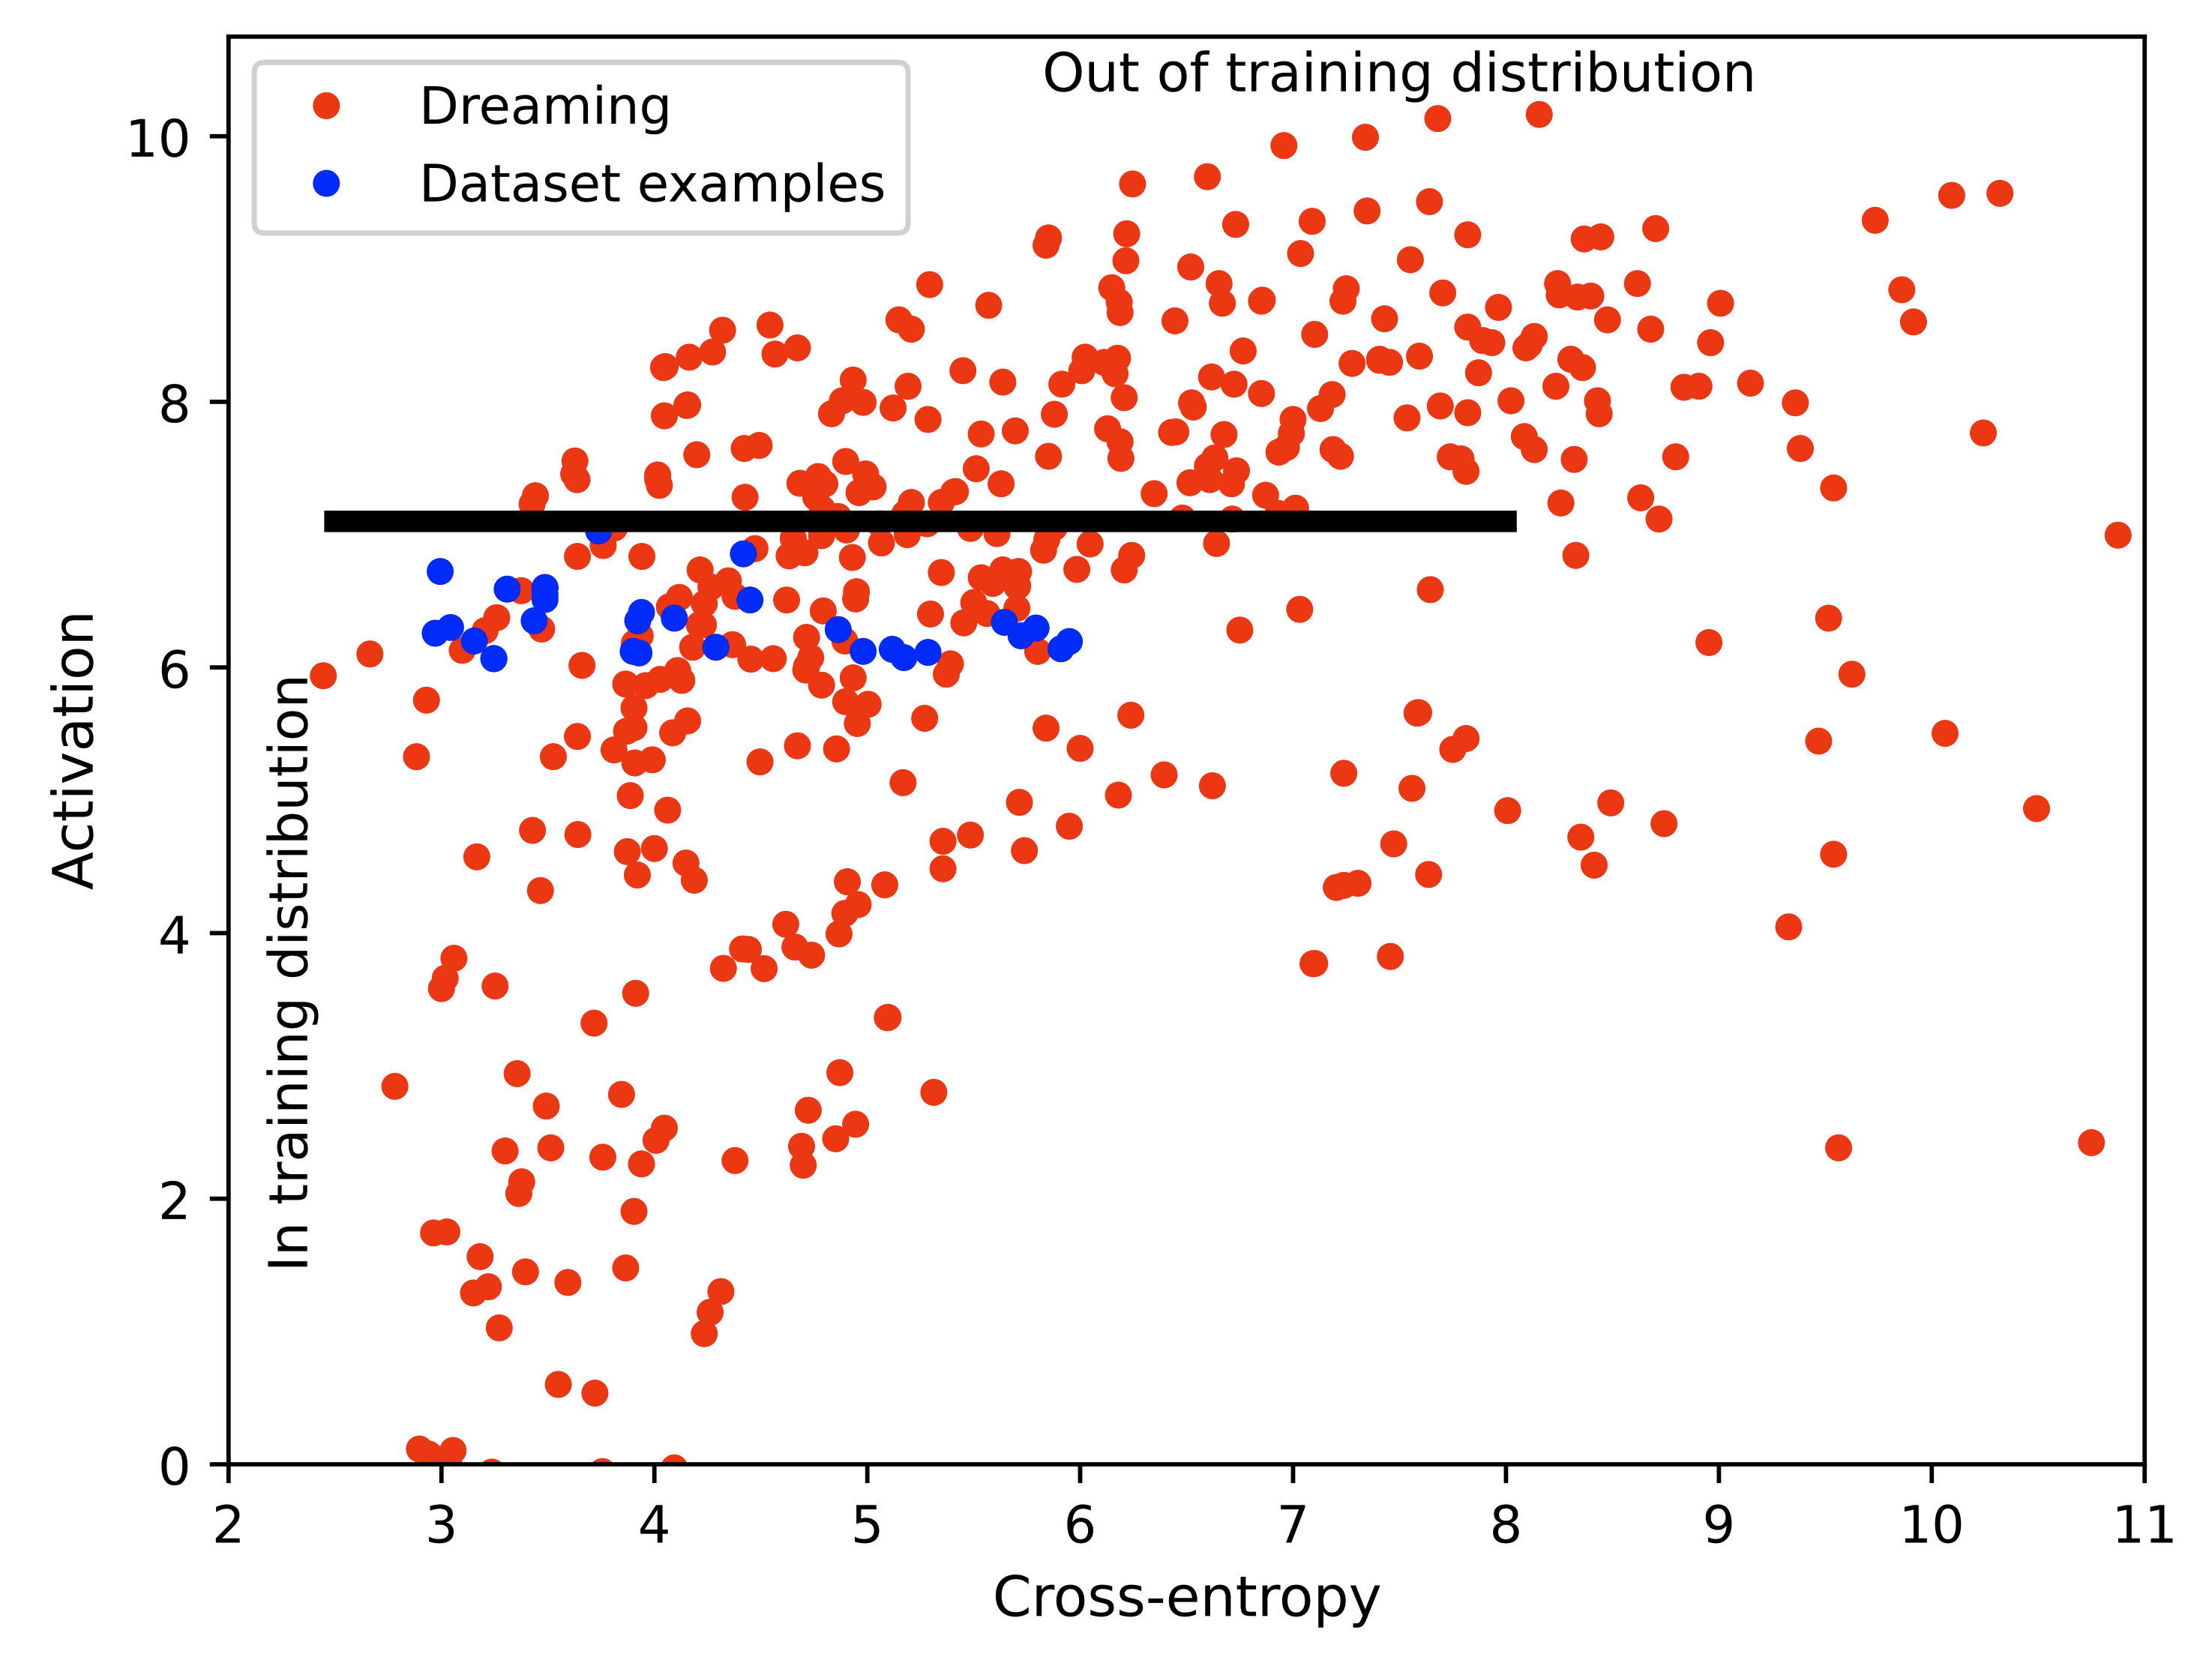 Figure: Comparing activation and cross-entropy between dreaming outputs and the top 64 max-activating dataset examples from 500 million tokens of the Pile. Lower cross-entropy prompts are more fluent. The black line is schematically separating regions of the plot that are empirically inside and outside the training distribution.